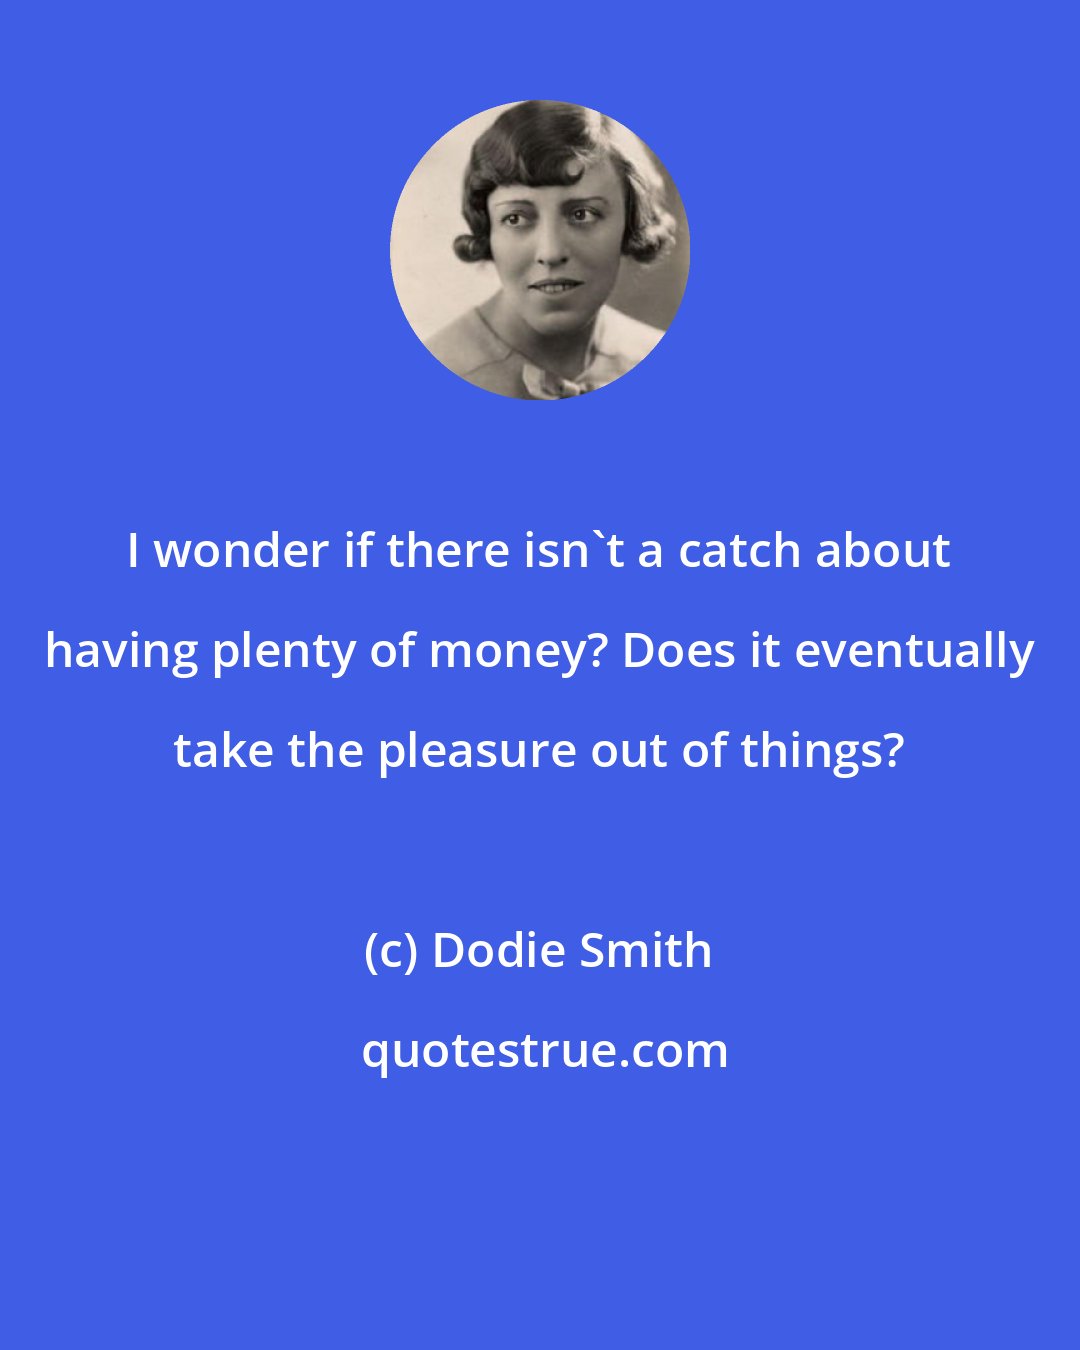 Dodie Smith: I wonder if there isn't a catch about having plenty of money? Does it eventually take the pleasure out of things?